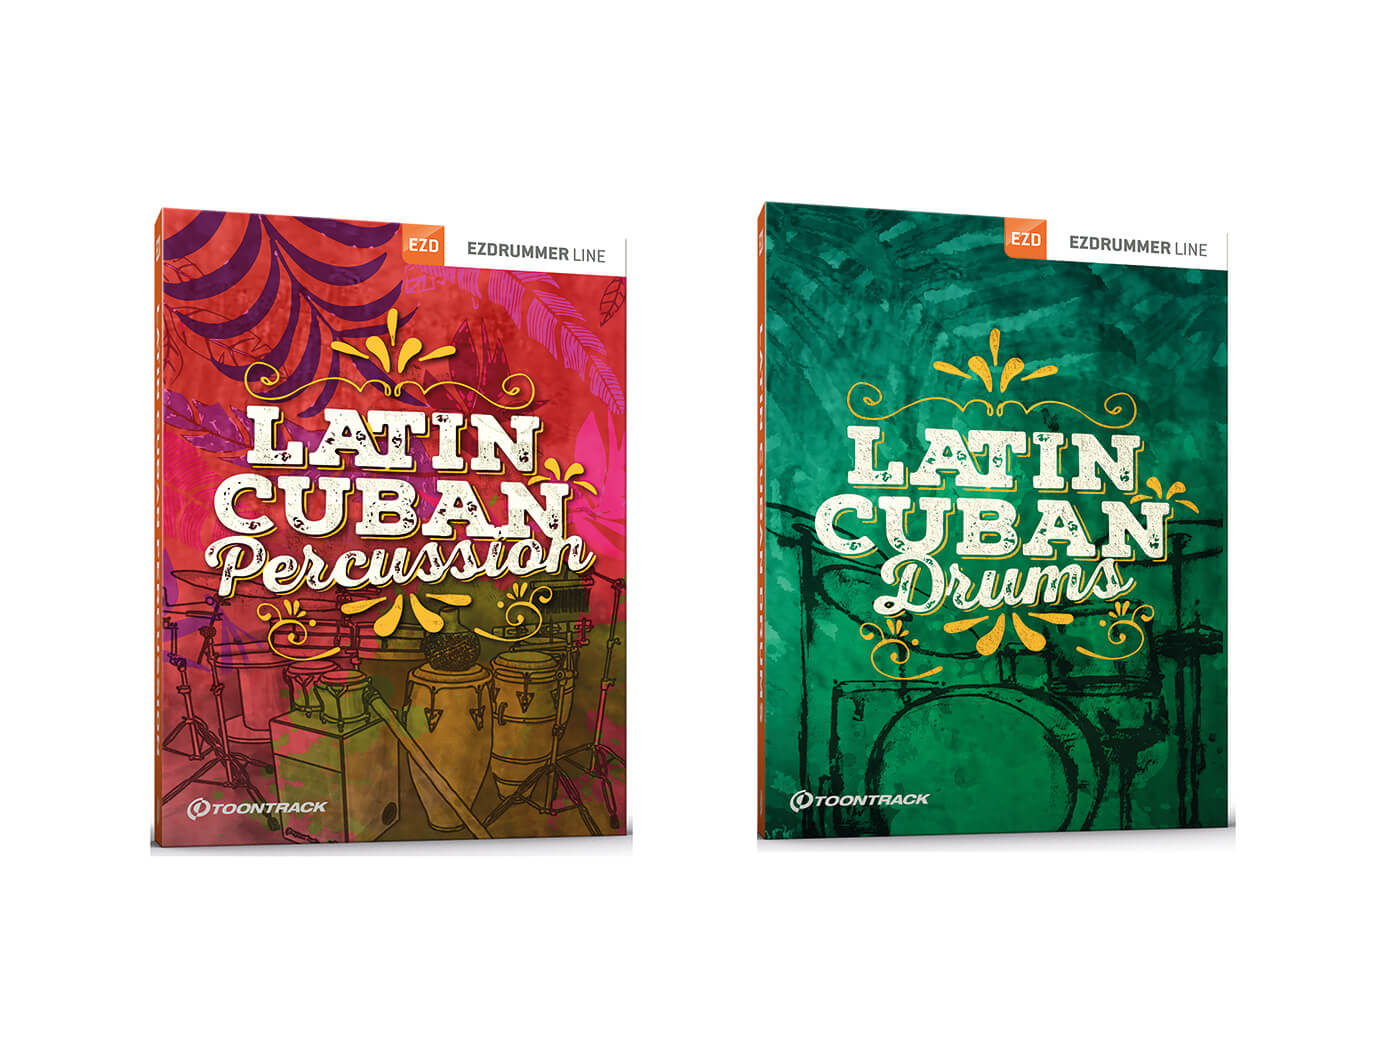 Toontrack Latin Cuban Drums and Percussion